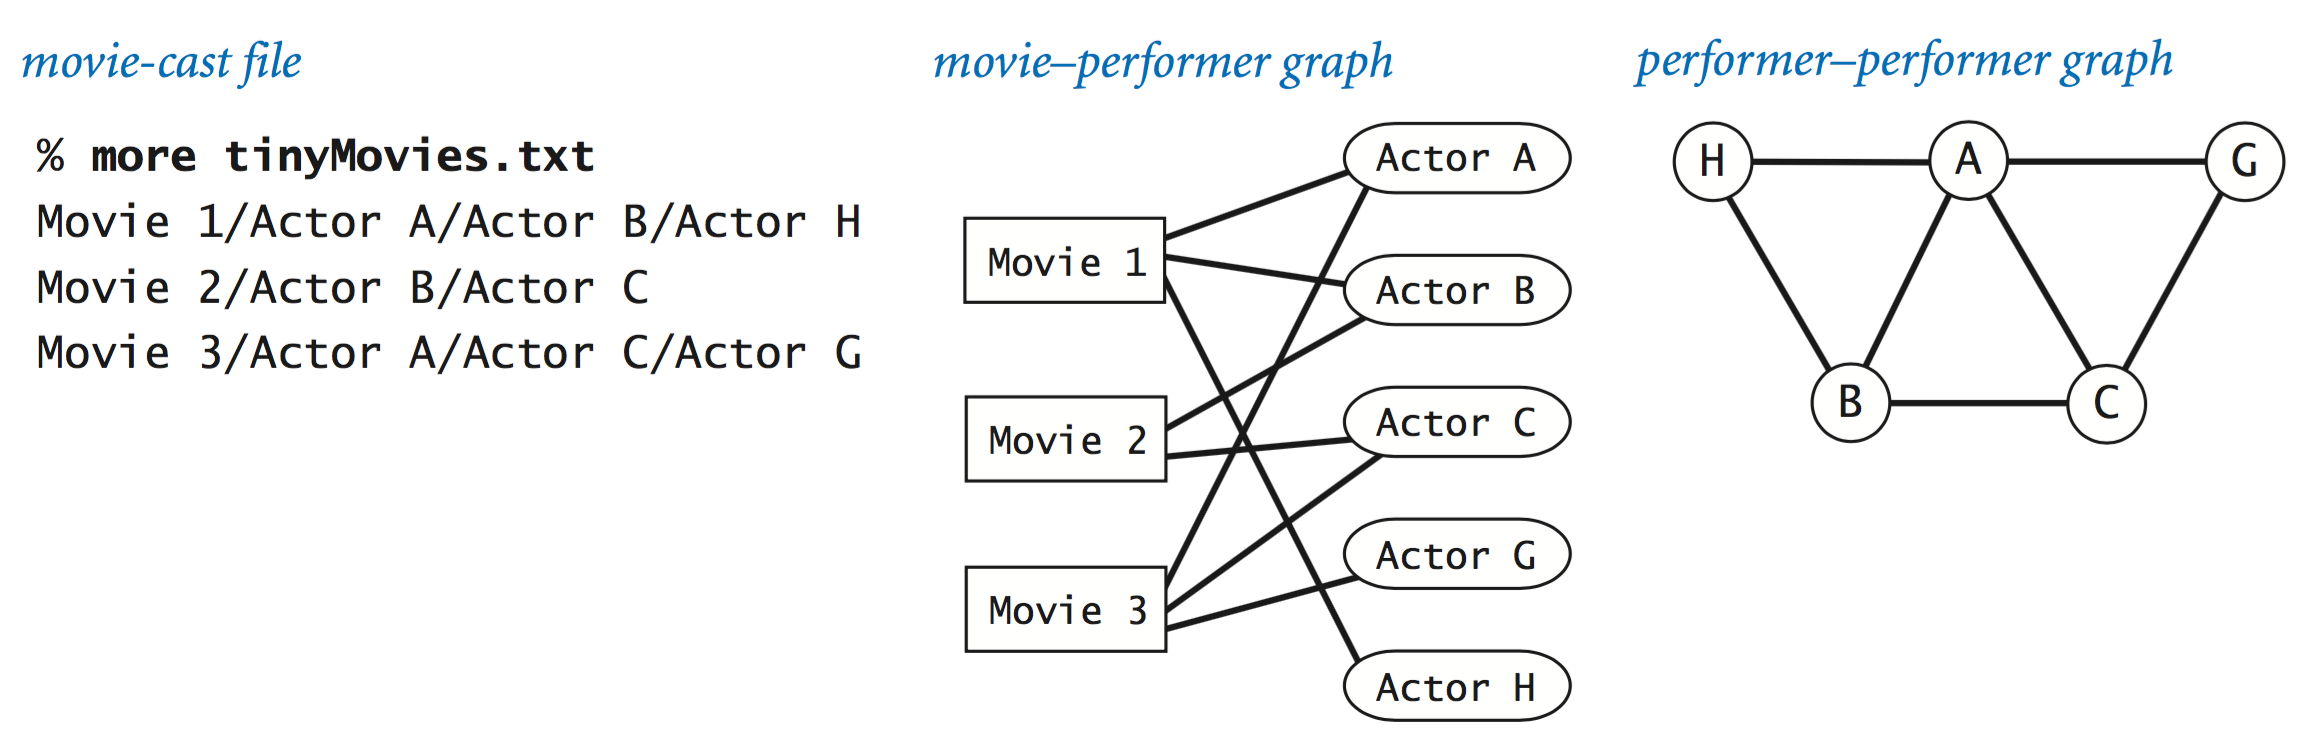 two different graph representations of a movie-cast file